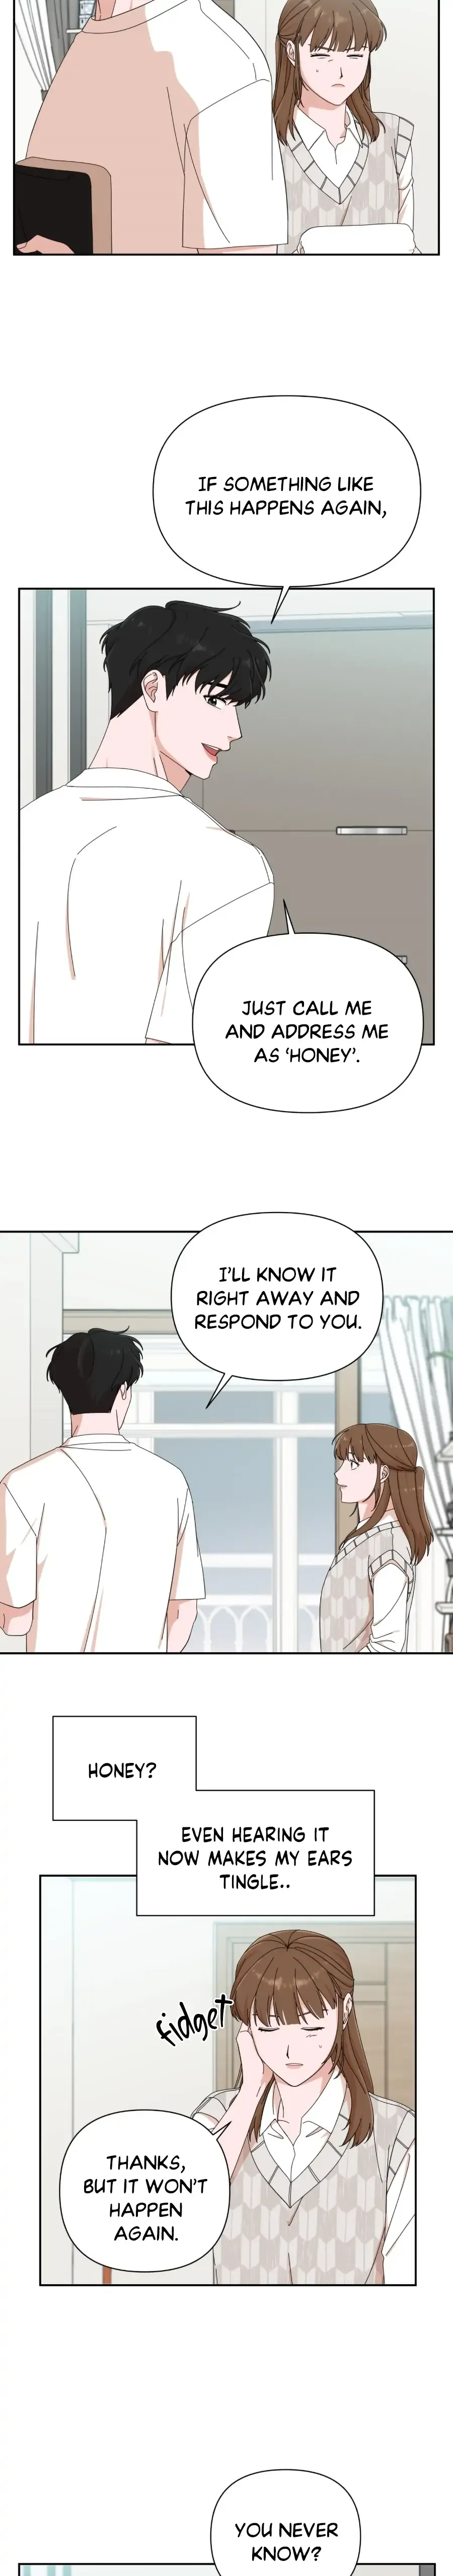 The Man with Pretty Lips Chapter 9 - Page 14